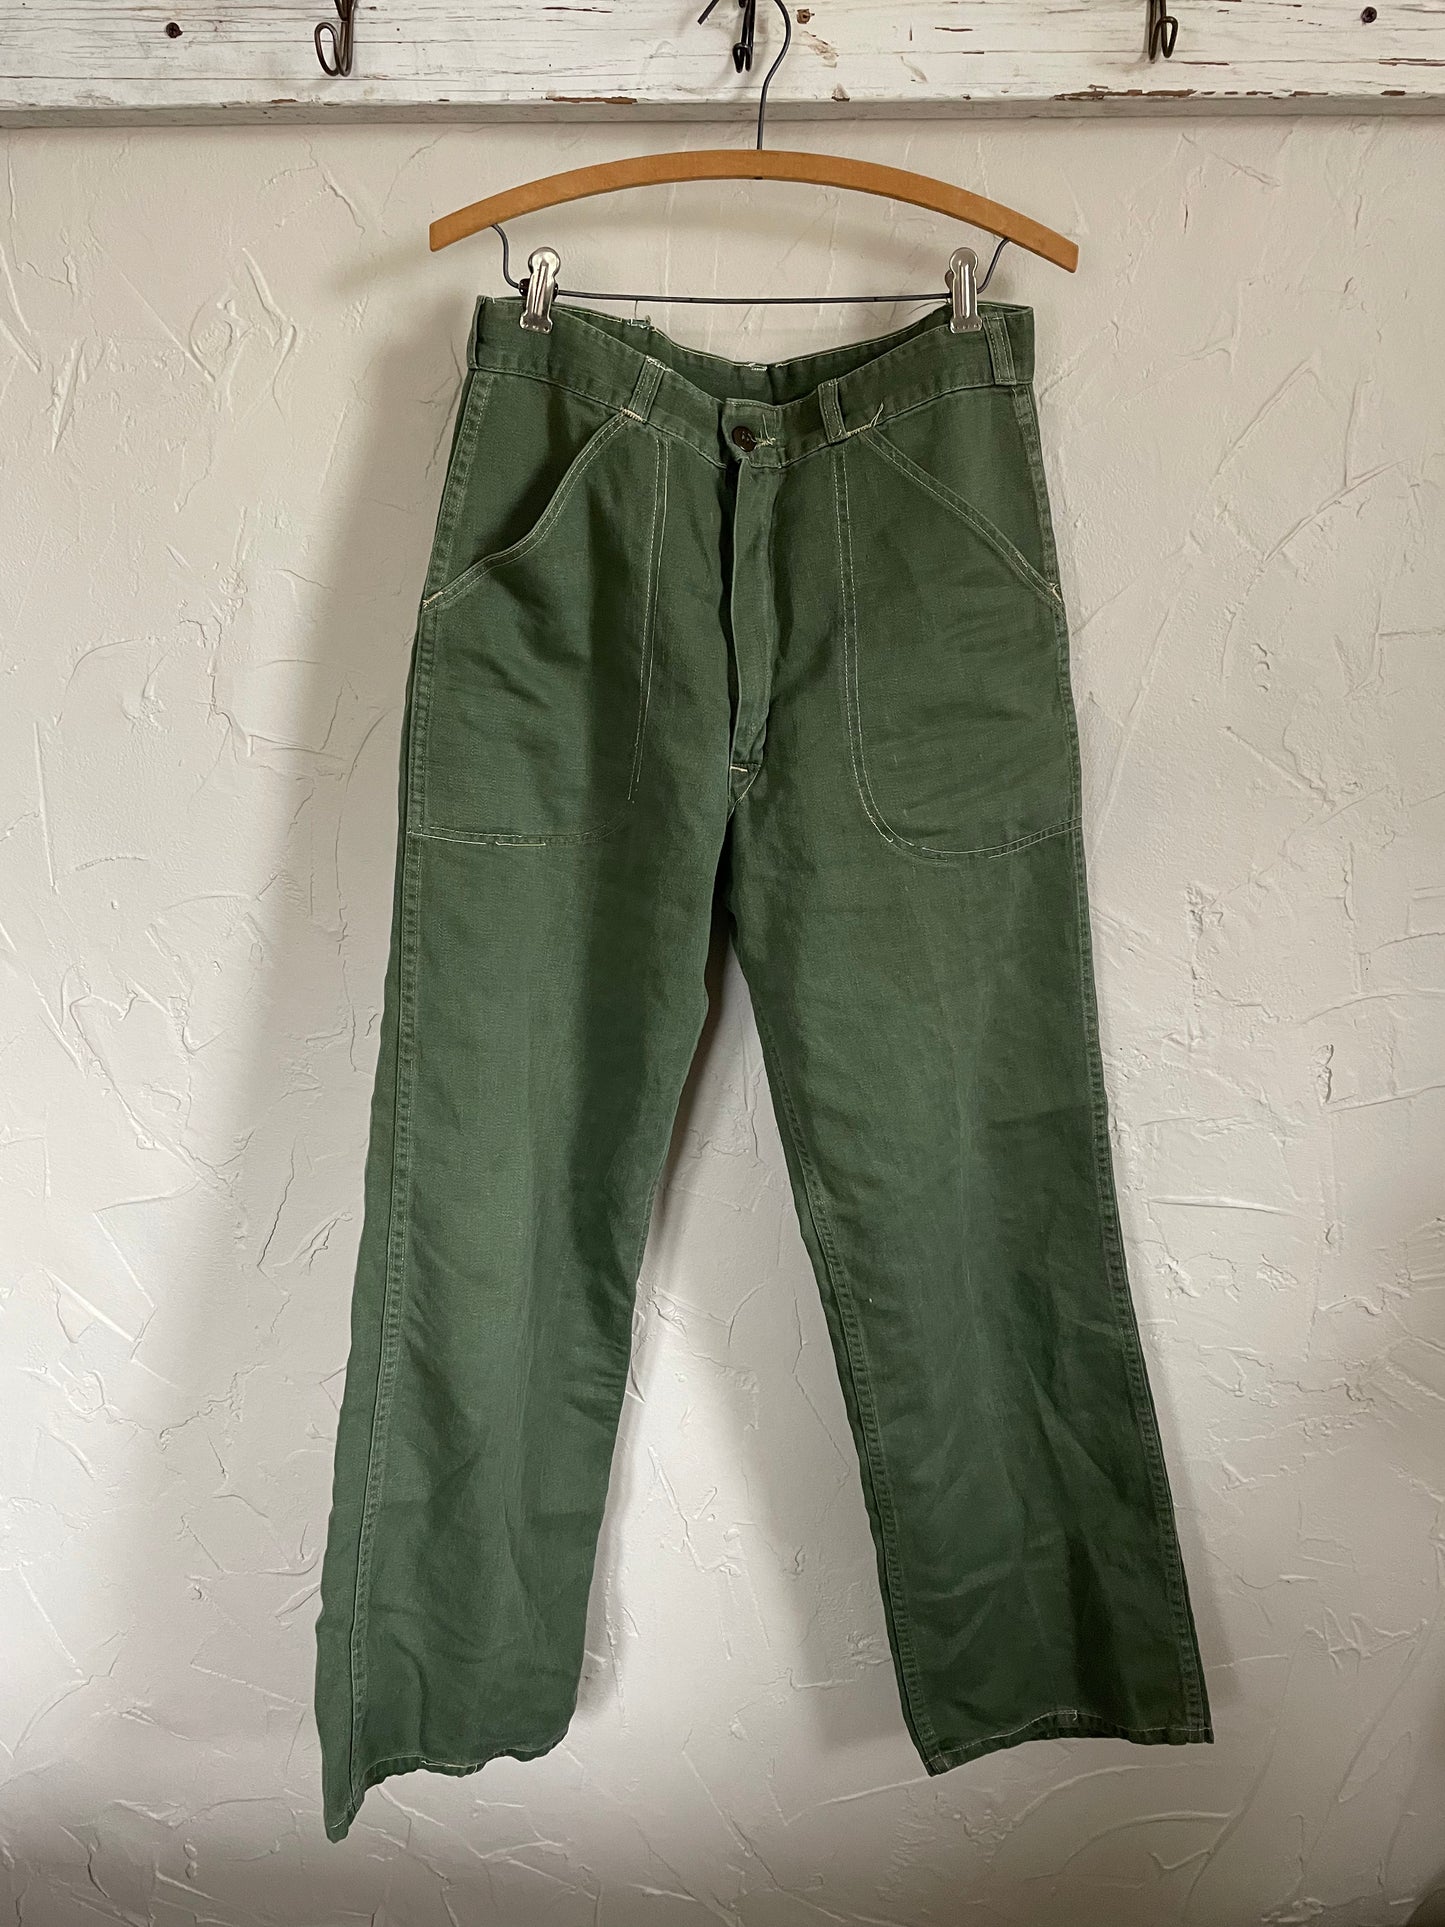 50s/60s Private Purchase OG-107 Army Fatigues